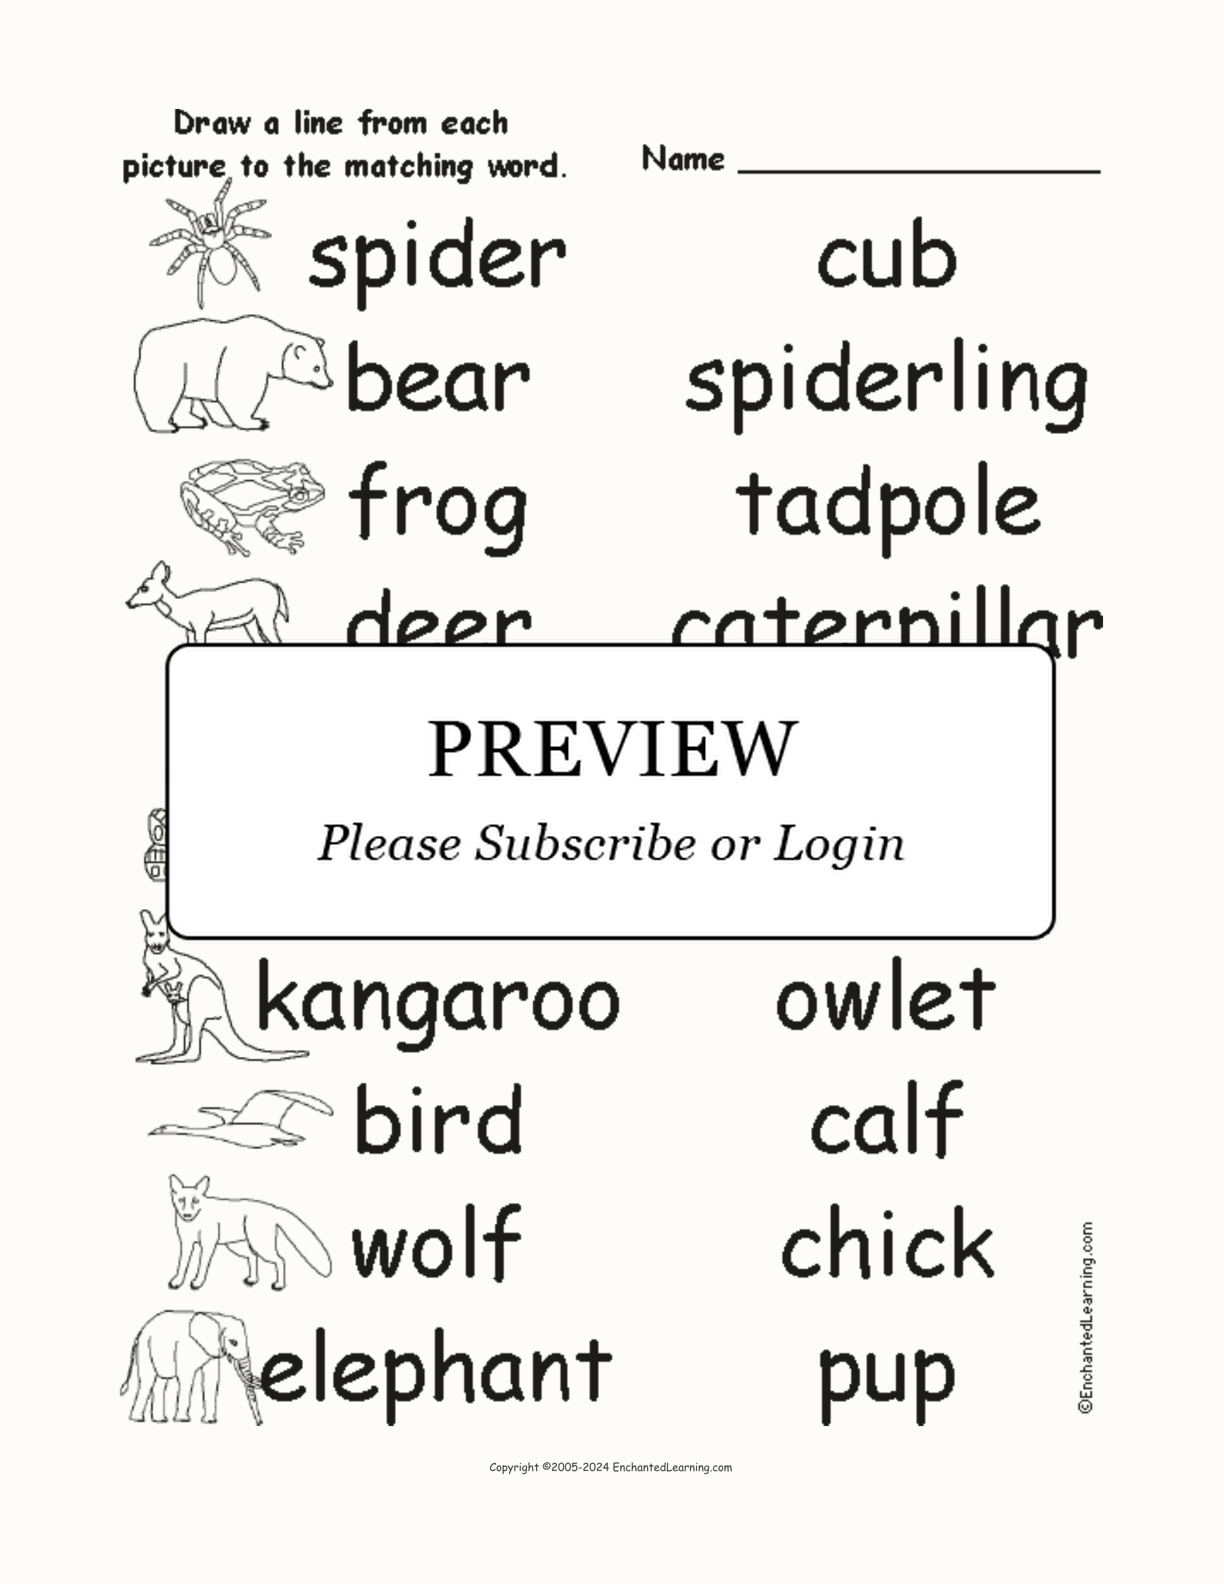 Animals and Babies - Match the Words to the Pictures interactive worksheet page 1